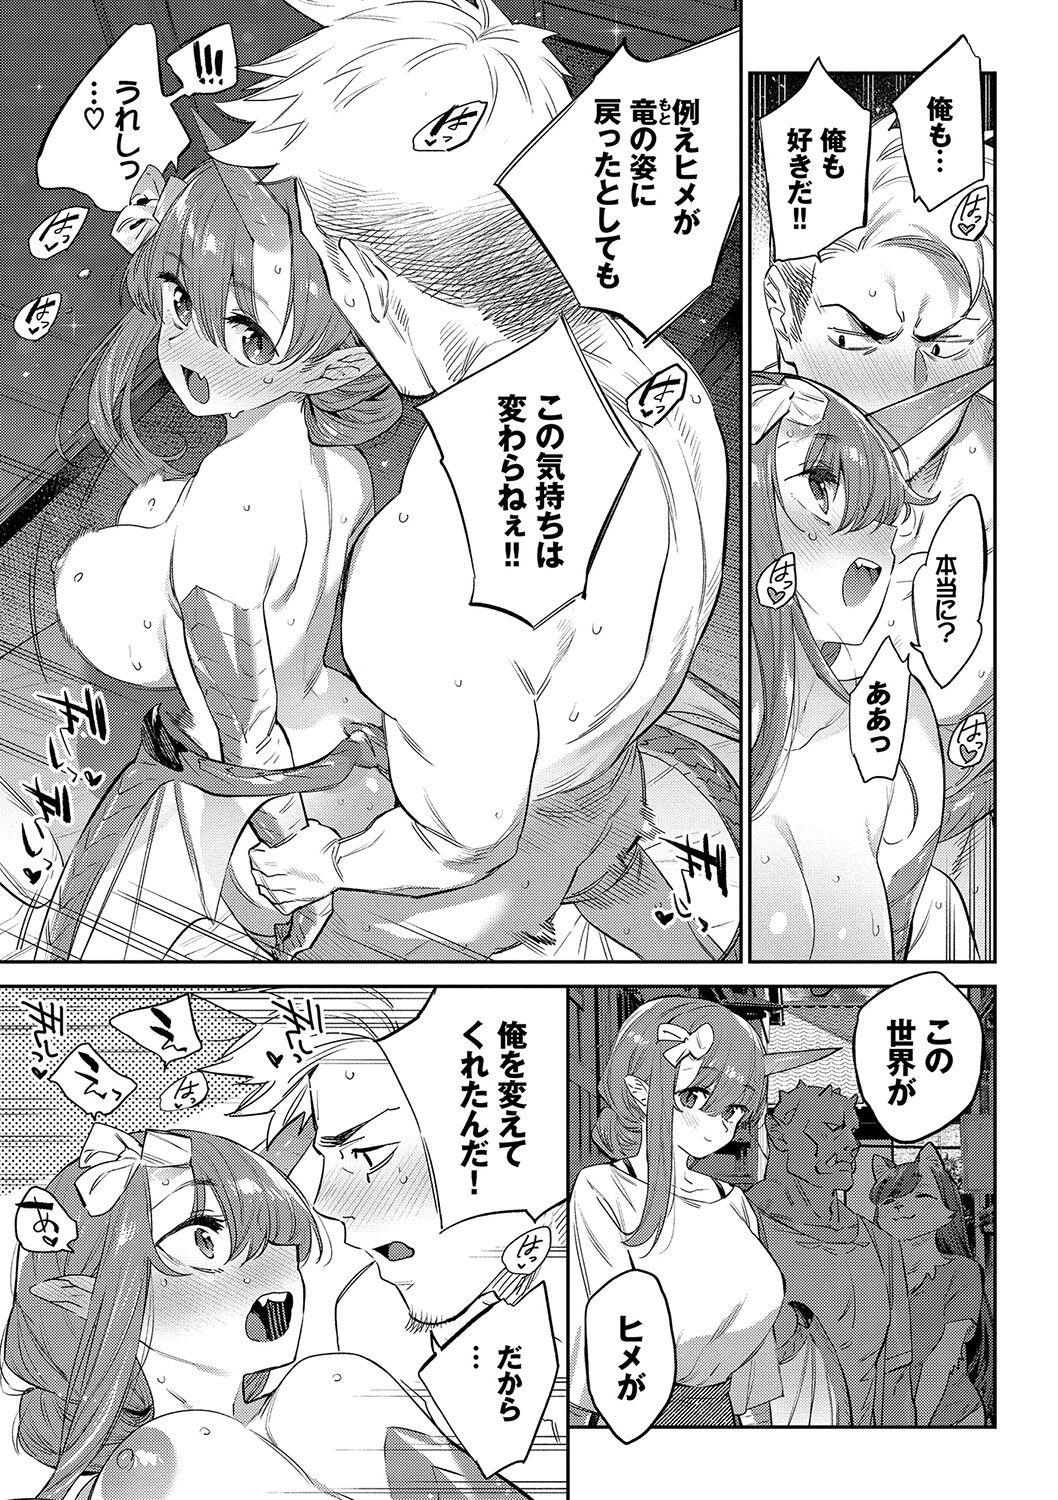 Ihou no Otome - Monster Girls in Another World 215